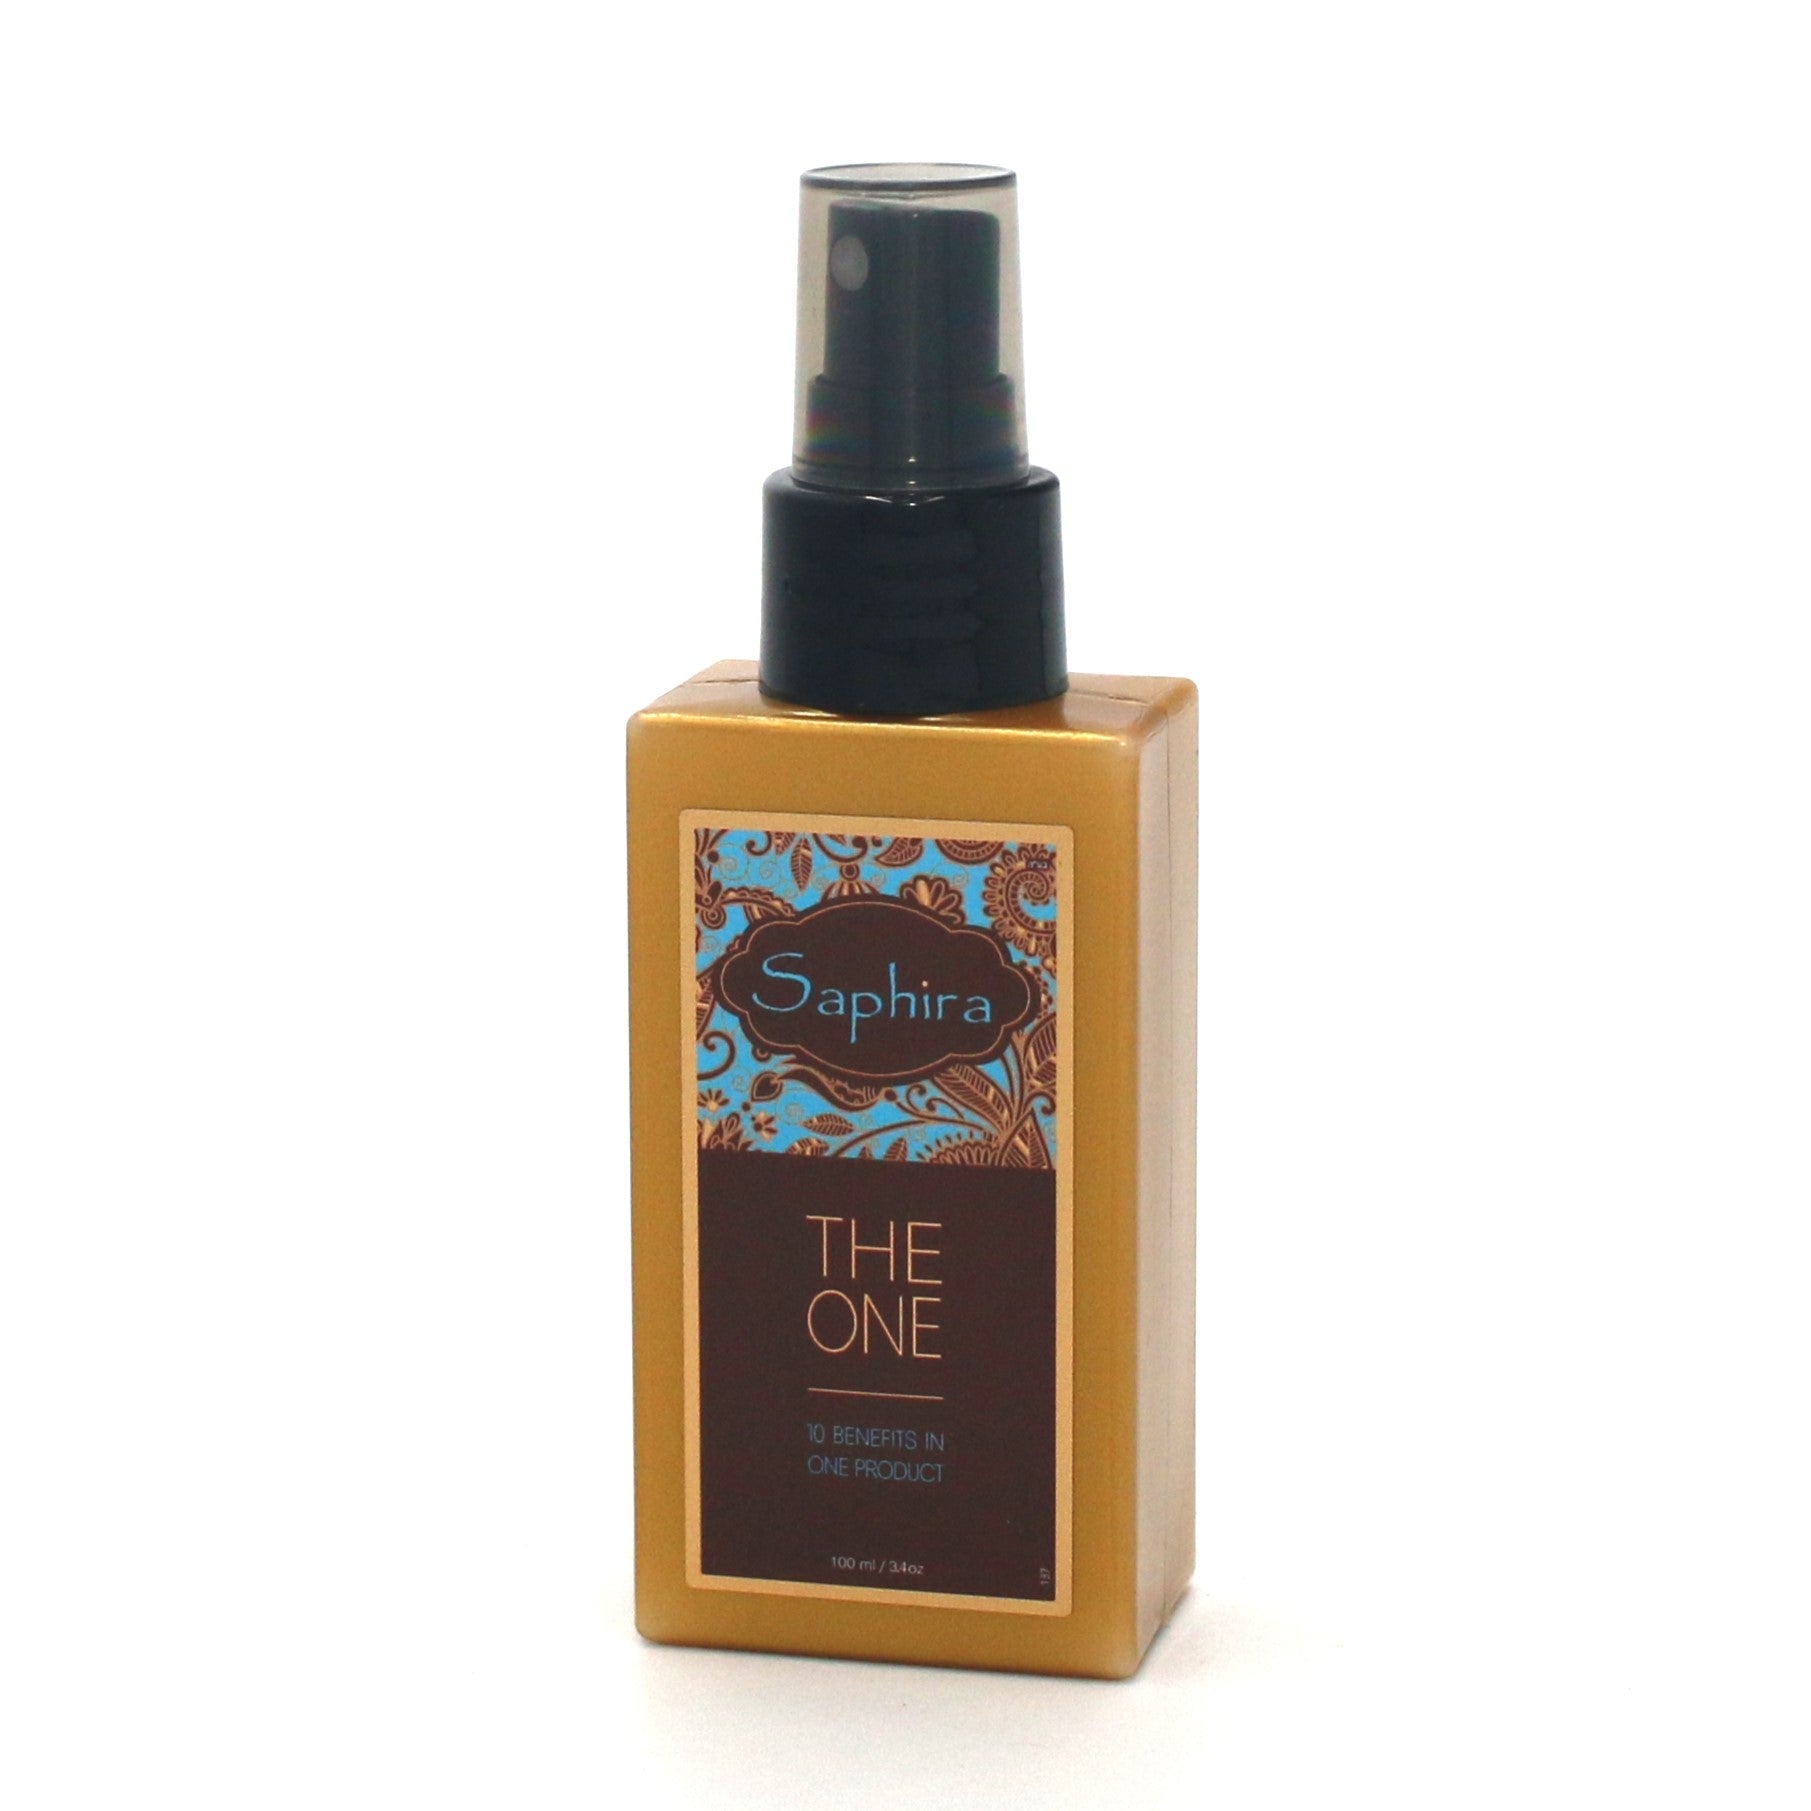 Saphira The One 10 Benefits In One Product 3.4 oz